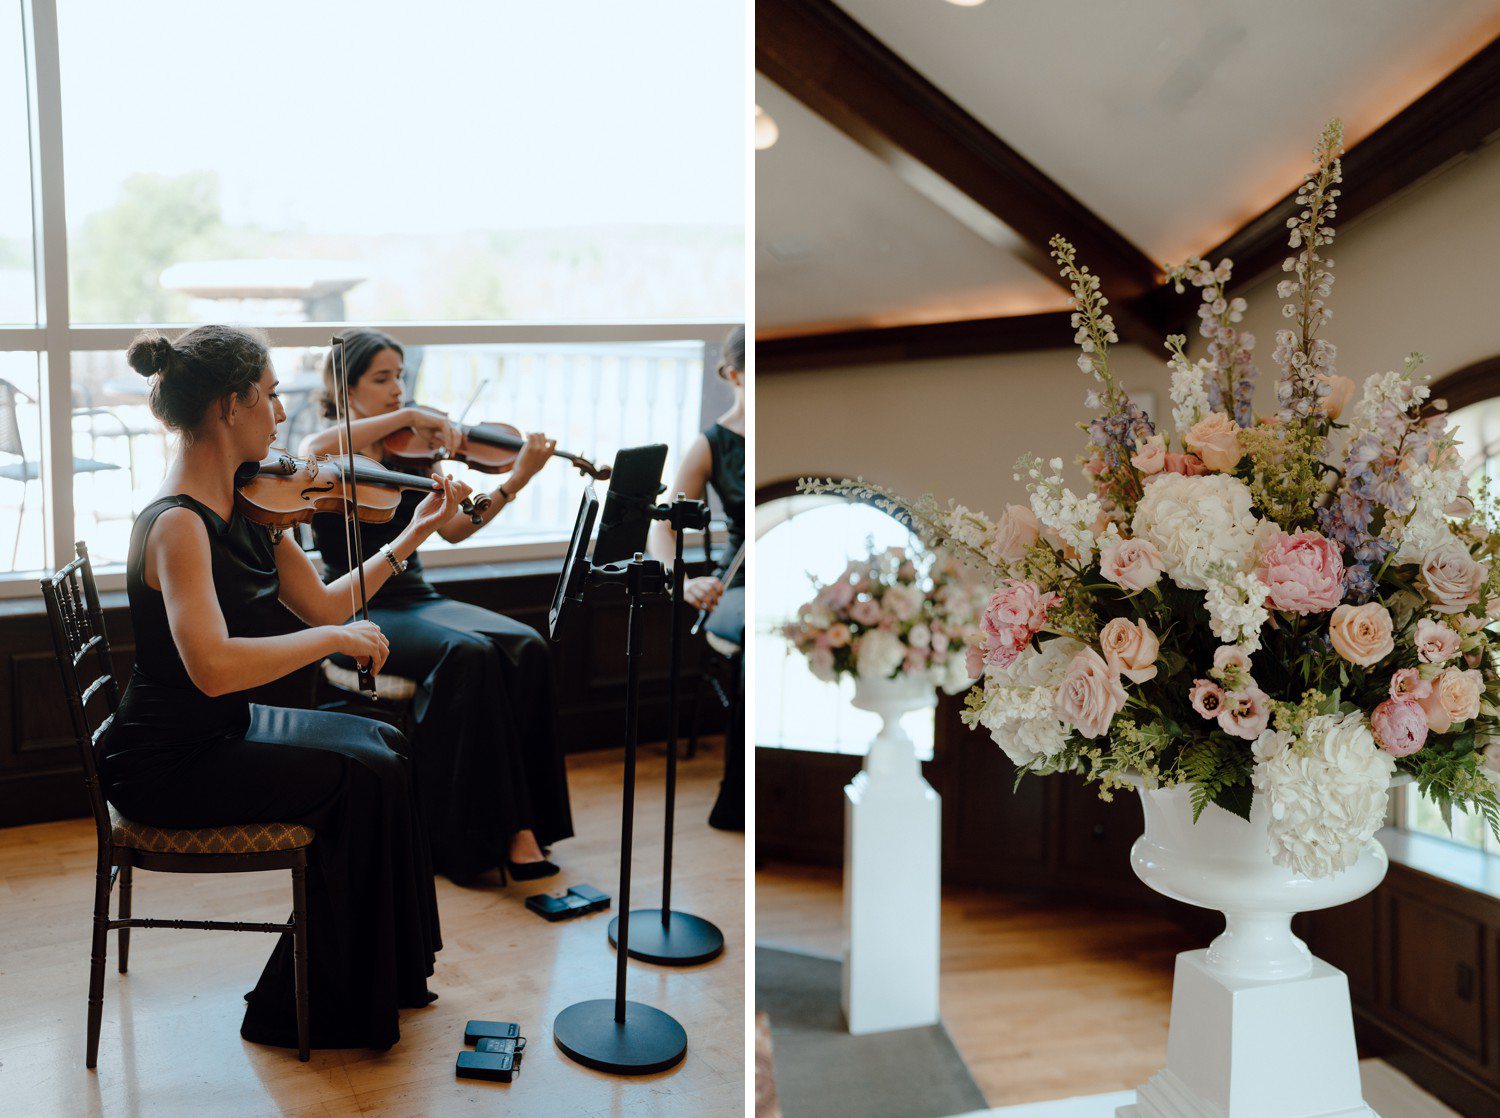 Wedding string band and ceremony flowers. 